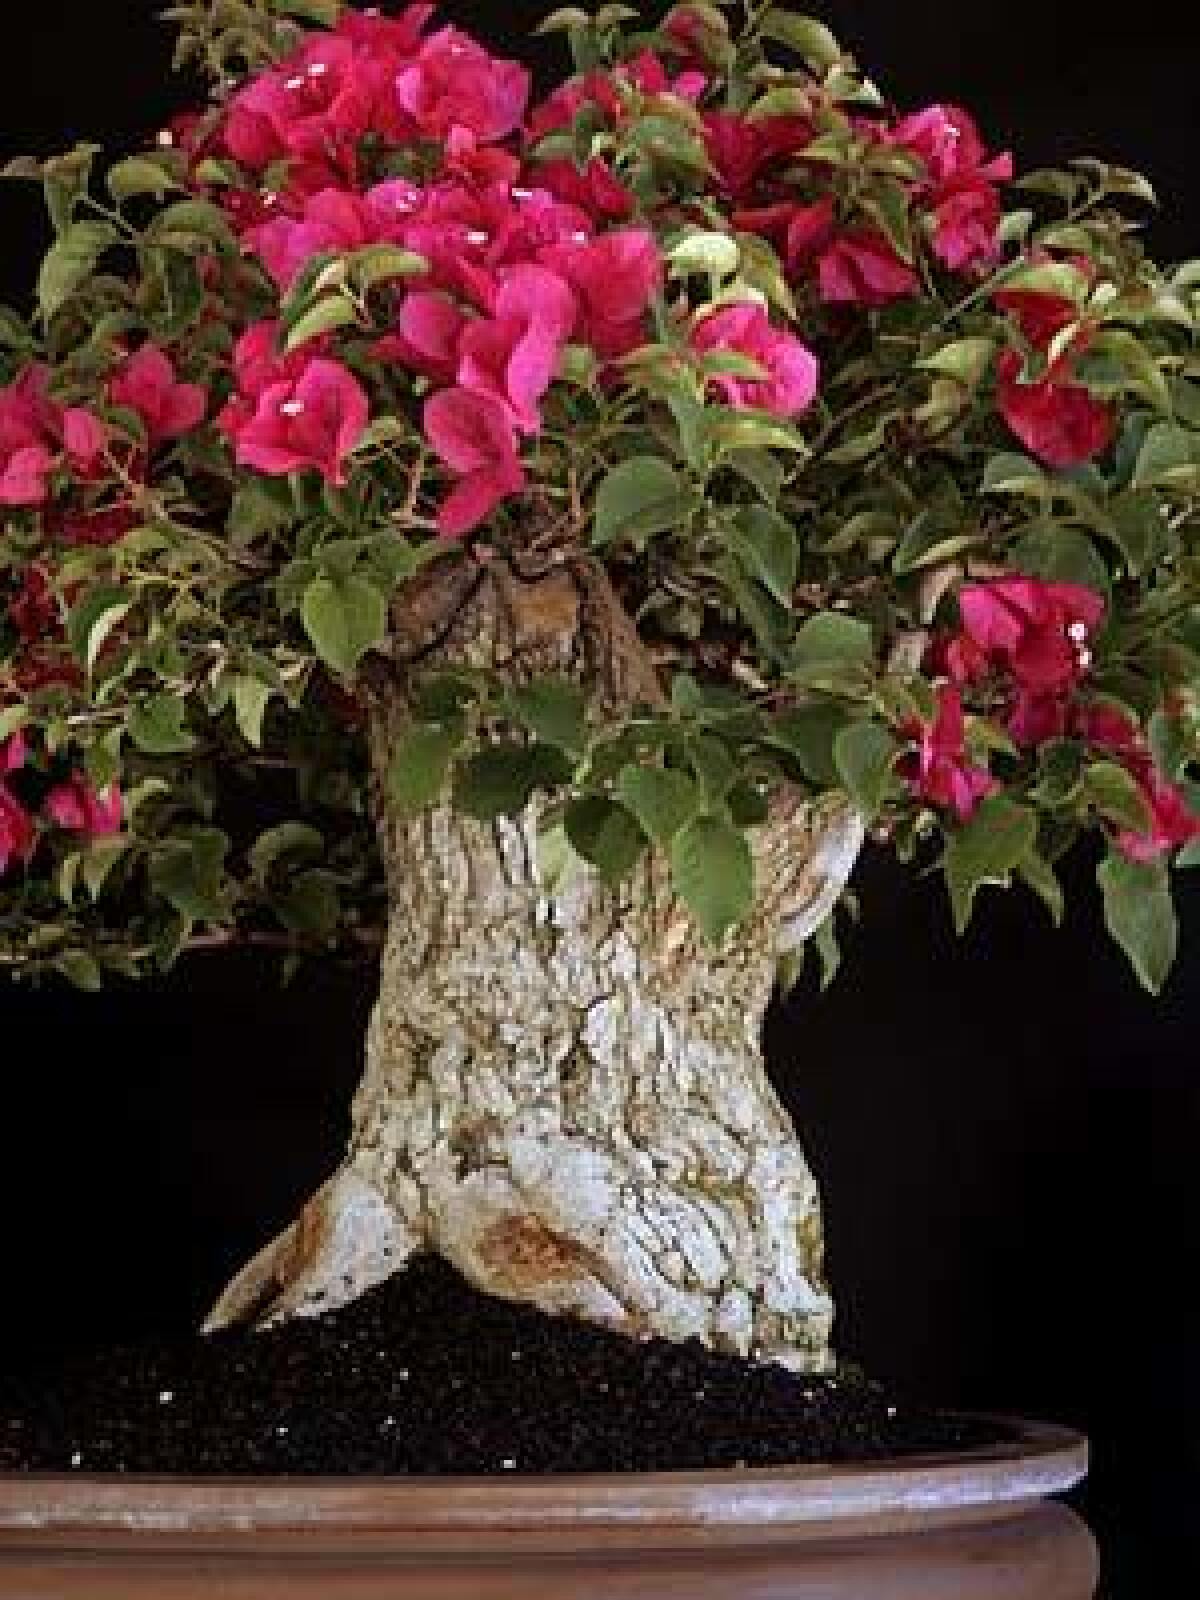 Paul De Rose's red bonsai bougainvillea started out as a 30-foot-tall bougainvillea that he dug up from a friend's garden 12 years ago. Then, after years of pruning and trimming, it transformed into a handsome, 3-foot bonsai.